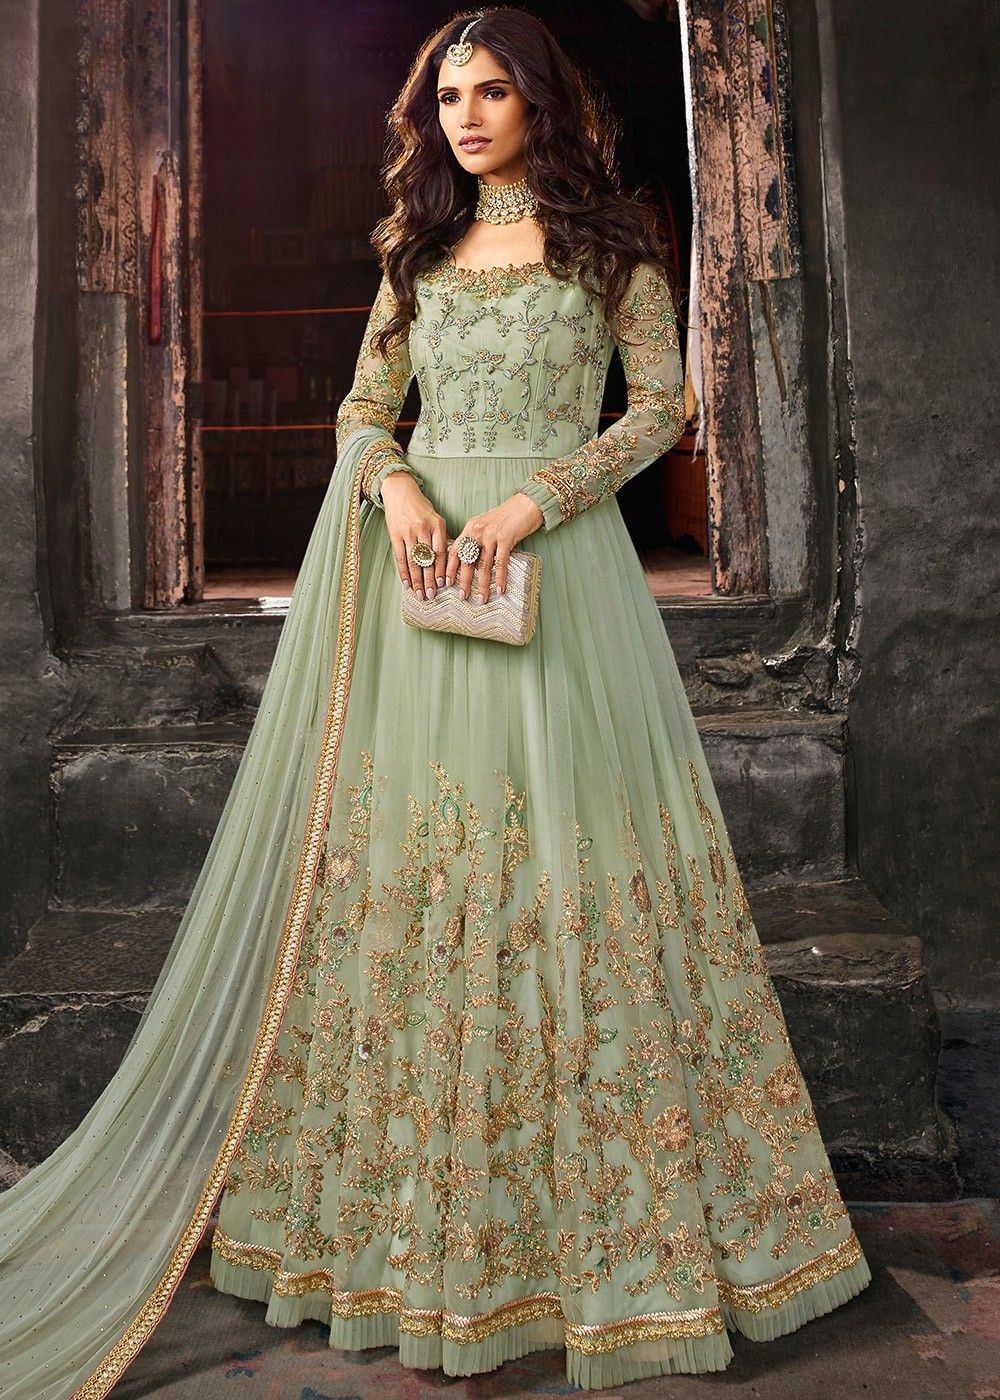 Green suit EMBROIDERED ANARKALI GOWN for women Salwar Suit Beautiful Georgette full flair gown Heavy Party Wear Suit Indian Gown